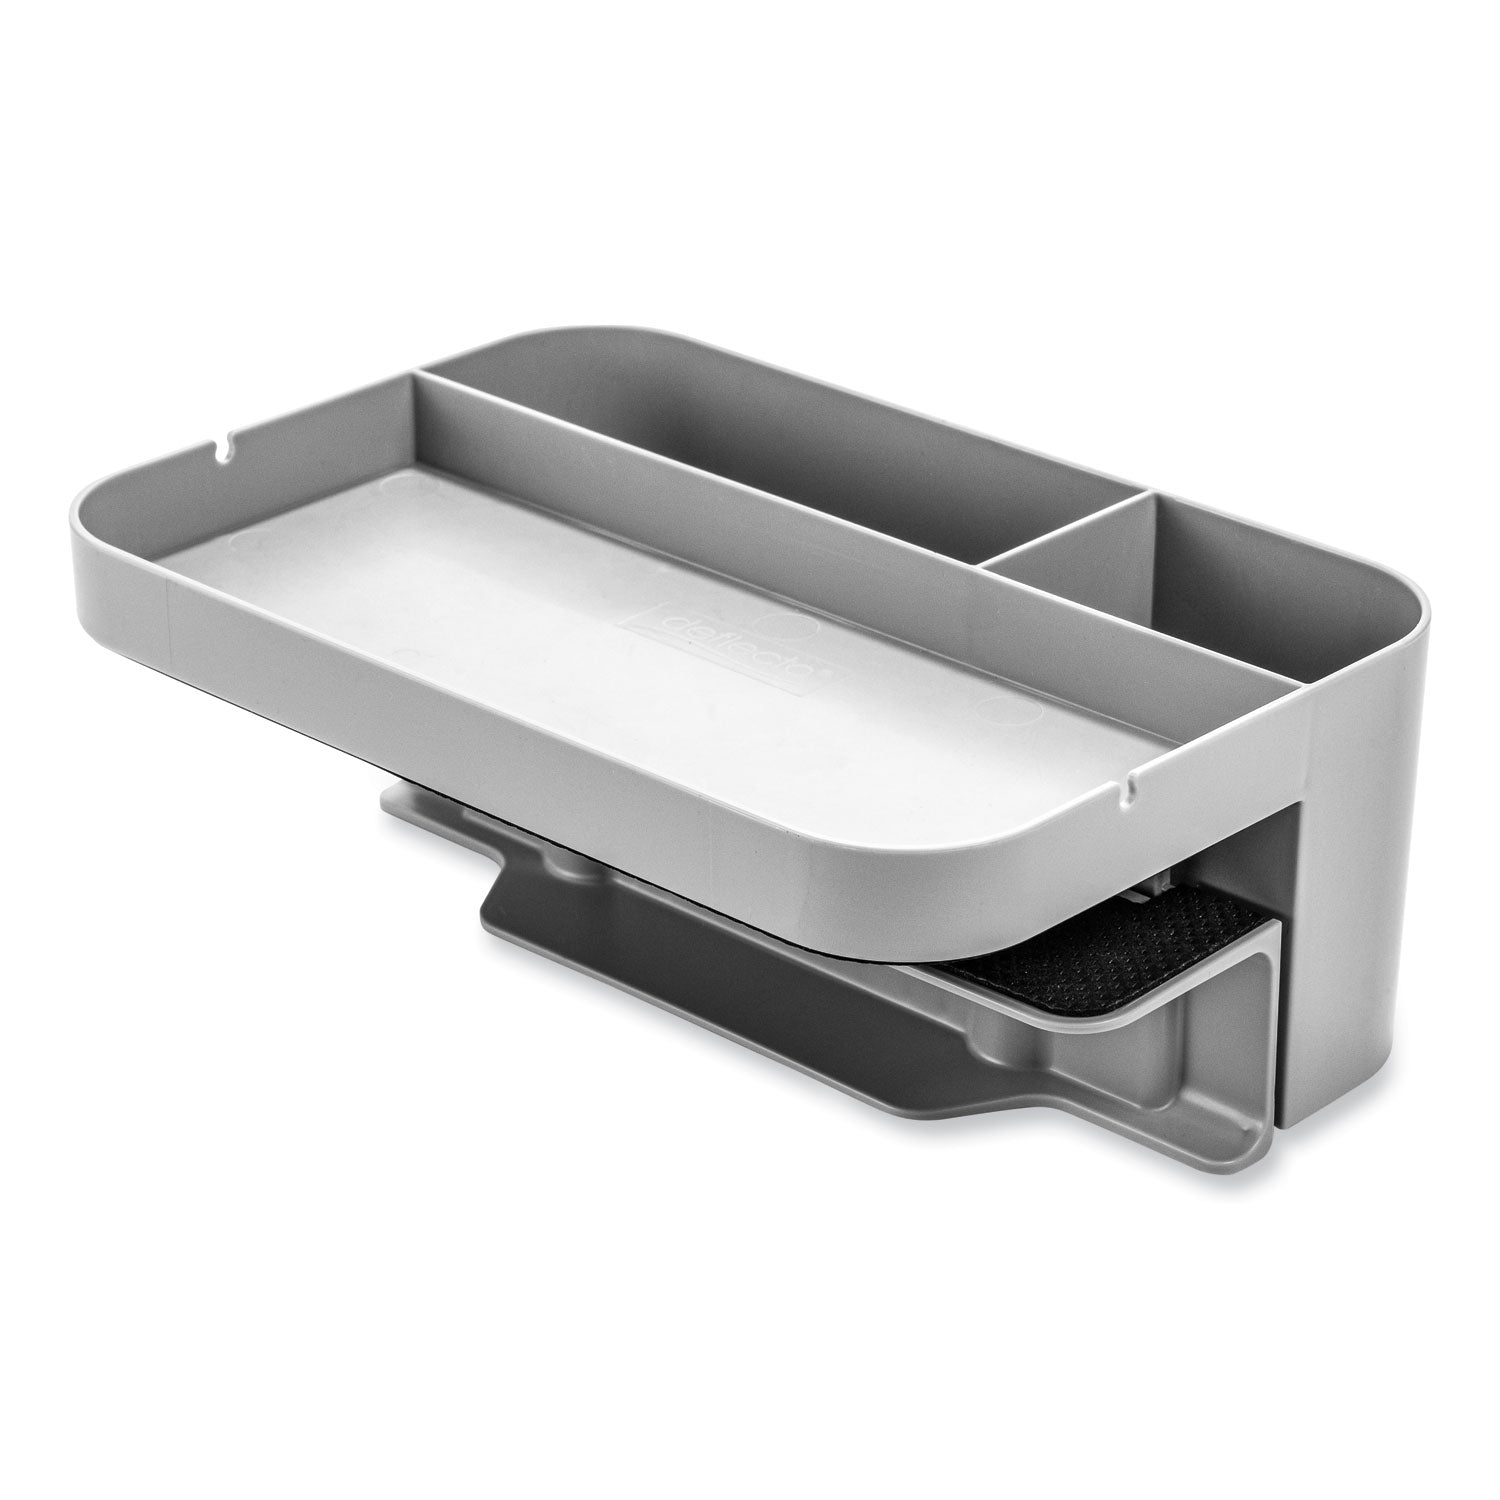 standing-desk-large-desk-organizer-two-sections-9-x-617-x-35-gray_def400002 - 1